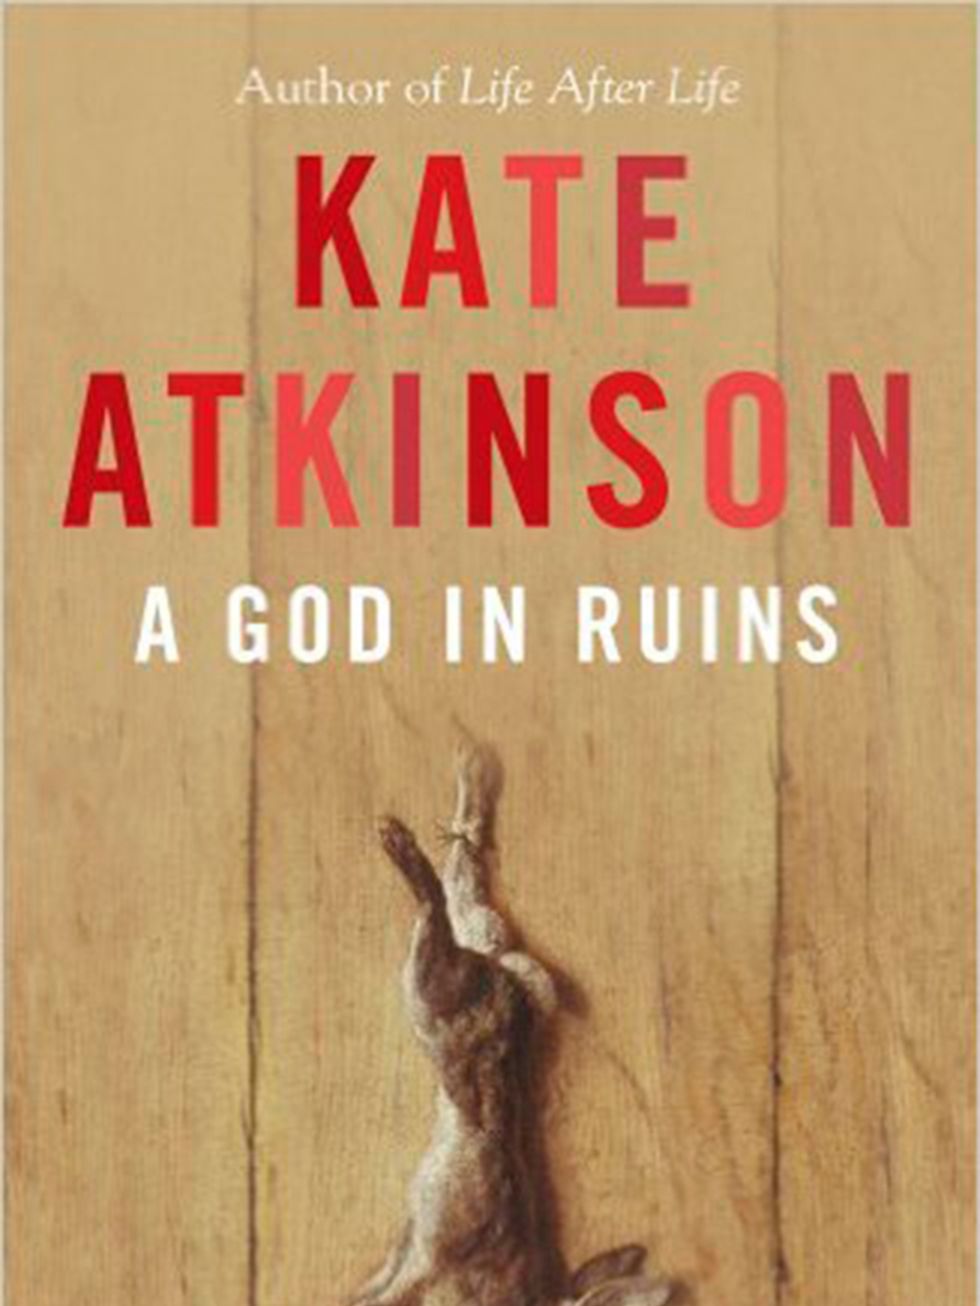 <p><strong>1. A God in Ruins by Kate Atkinson (Doubleday)</strong></p>

<p>The follow-up to Atkinsons beloved Life After Life managed to be just as moving and unexpected as the original. Although having read Life After Life will add some layers to this r